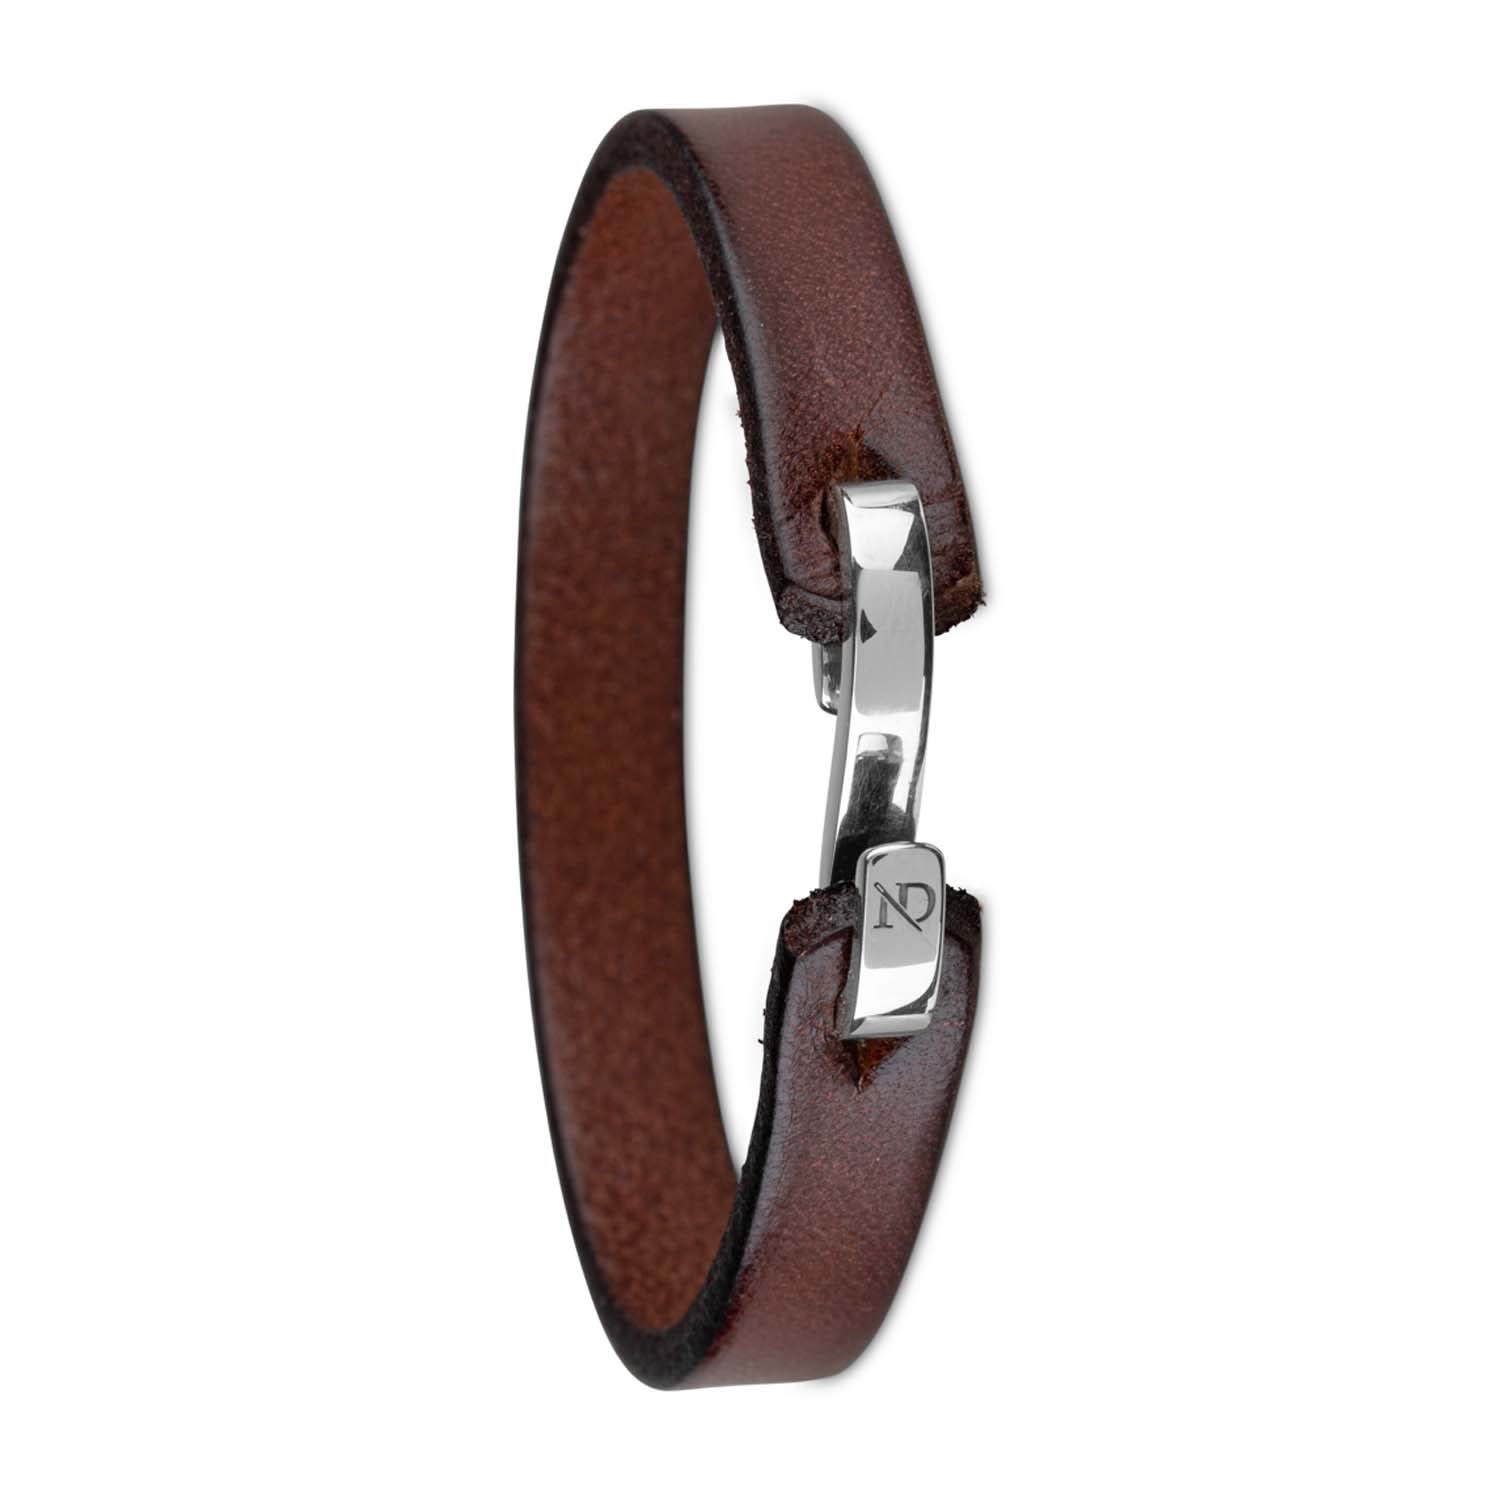 Men's Brown Chancery Chestnut Leather Bracelet With Sterling Silver S Hook Clasp N'Damus London